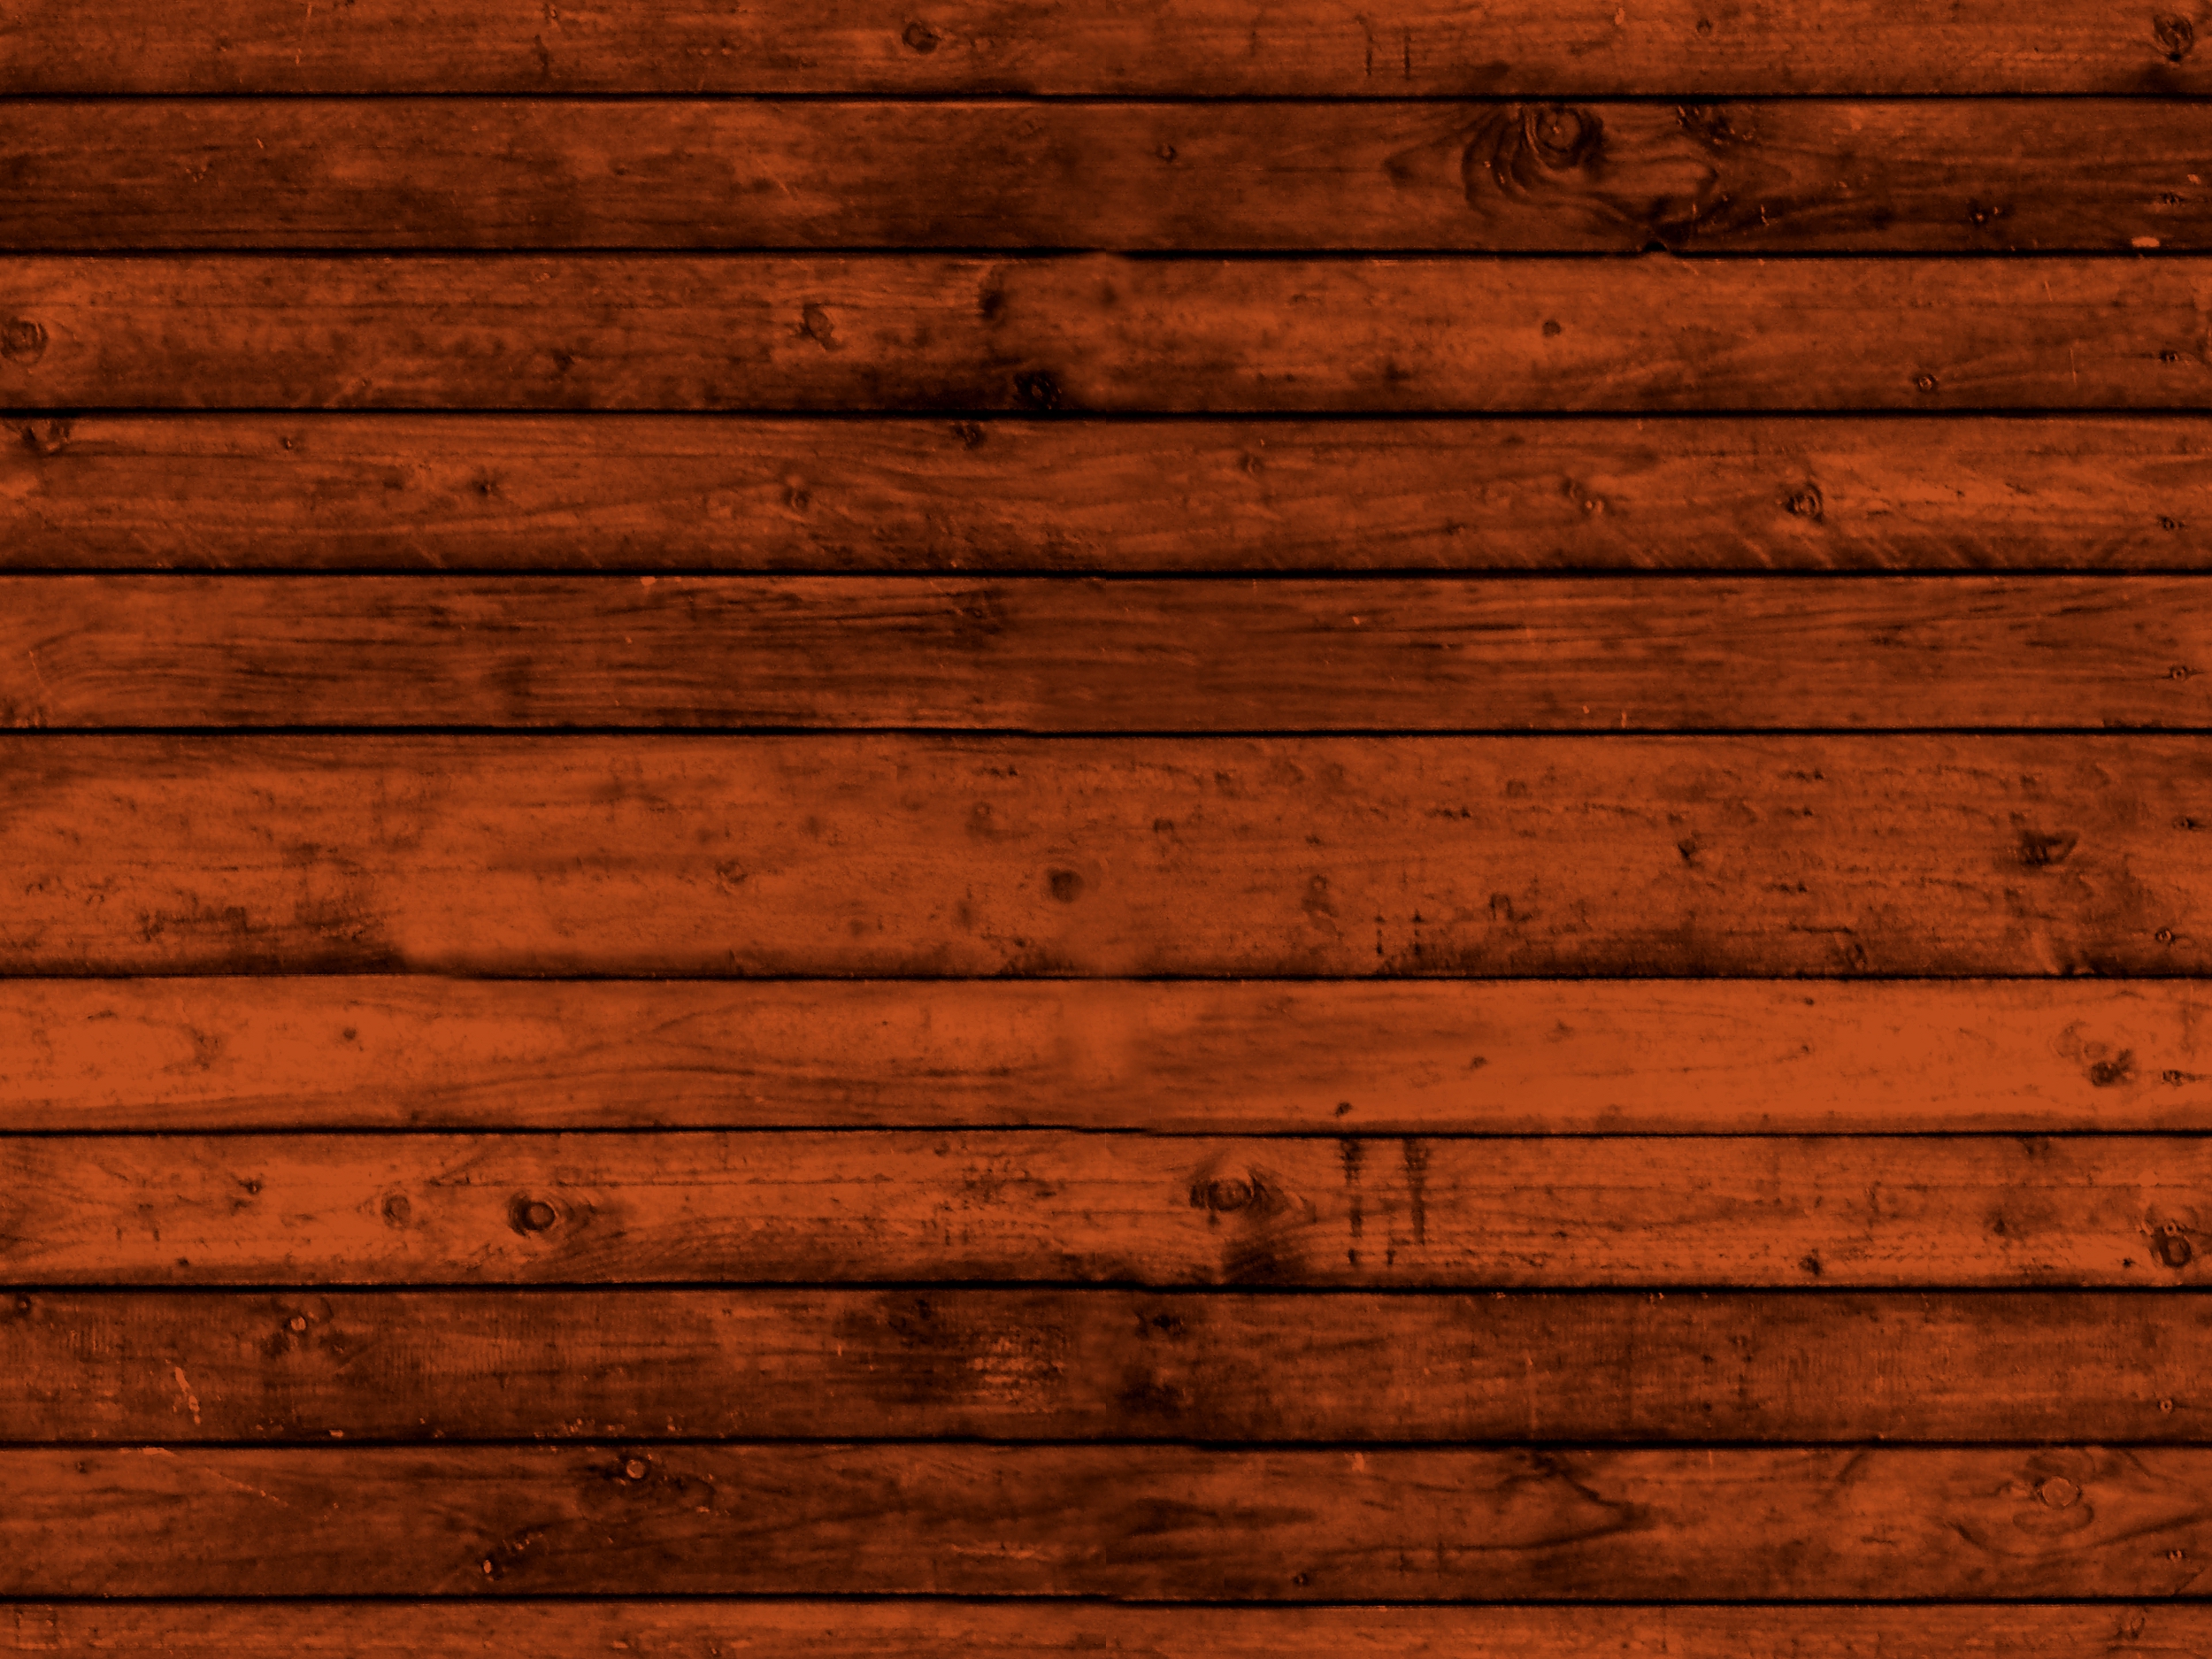 Like A Texture N D Wooden Plank Image Online Available At